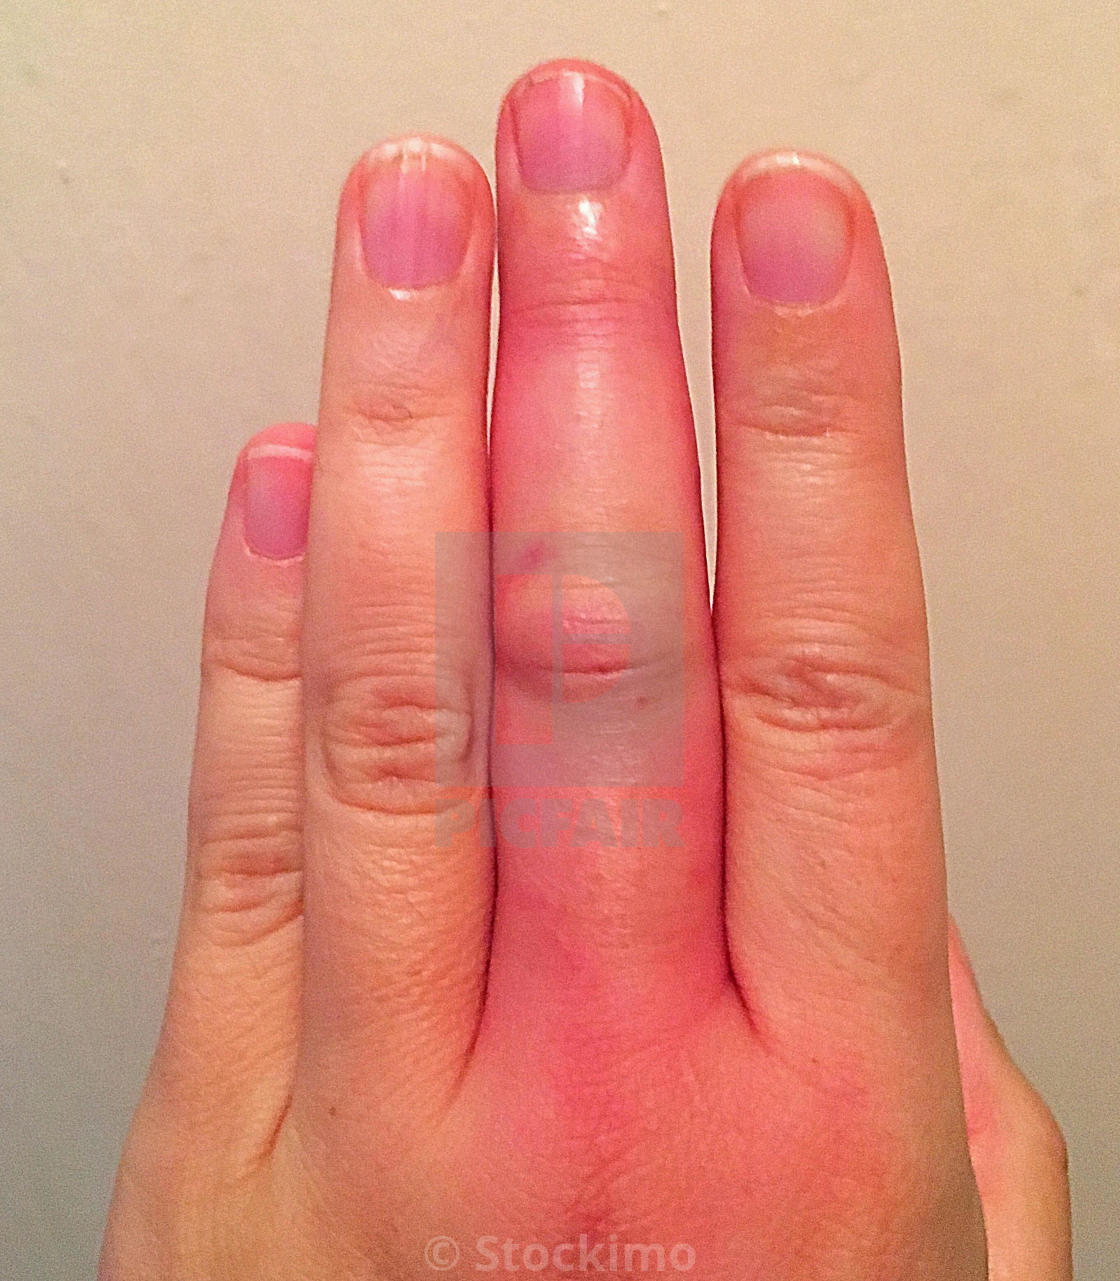 Swollen And Infected Finger From Insect Bite License Download Or